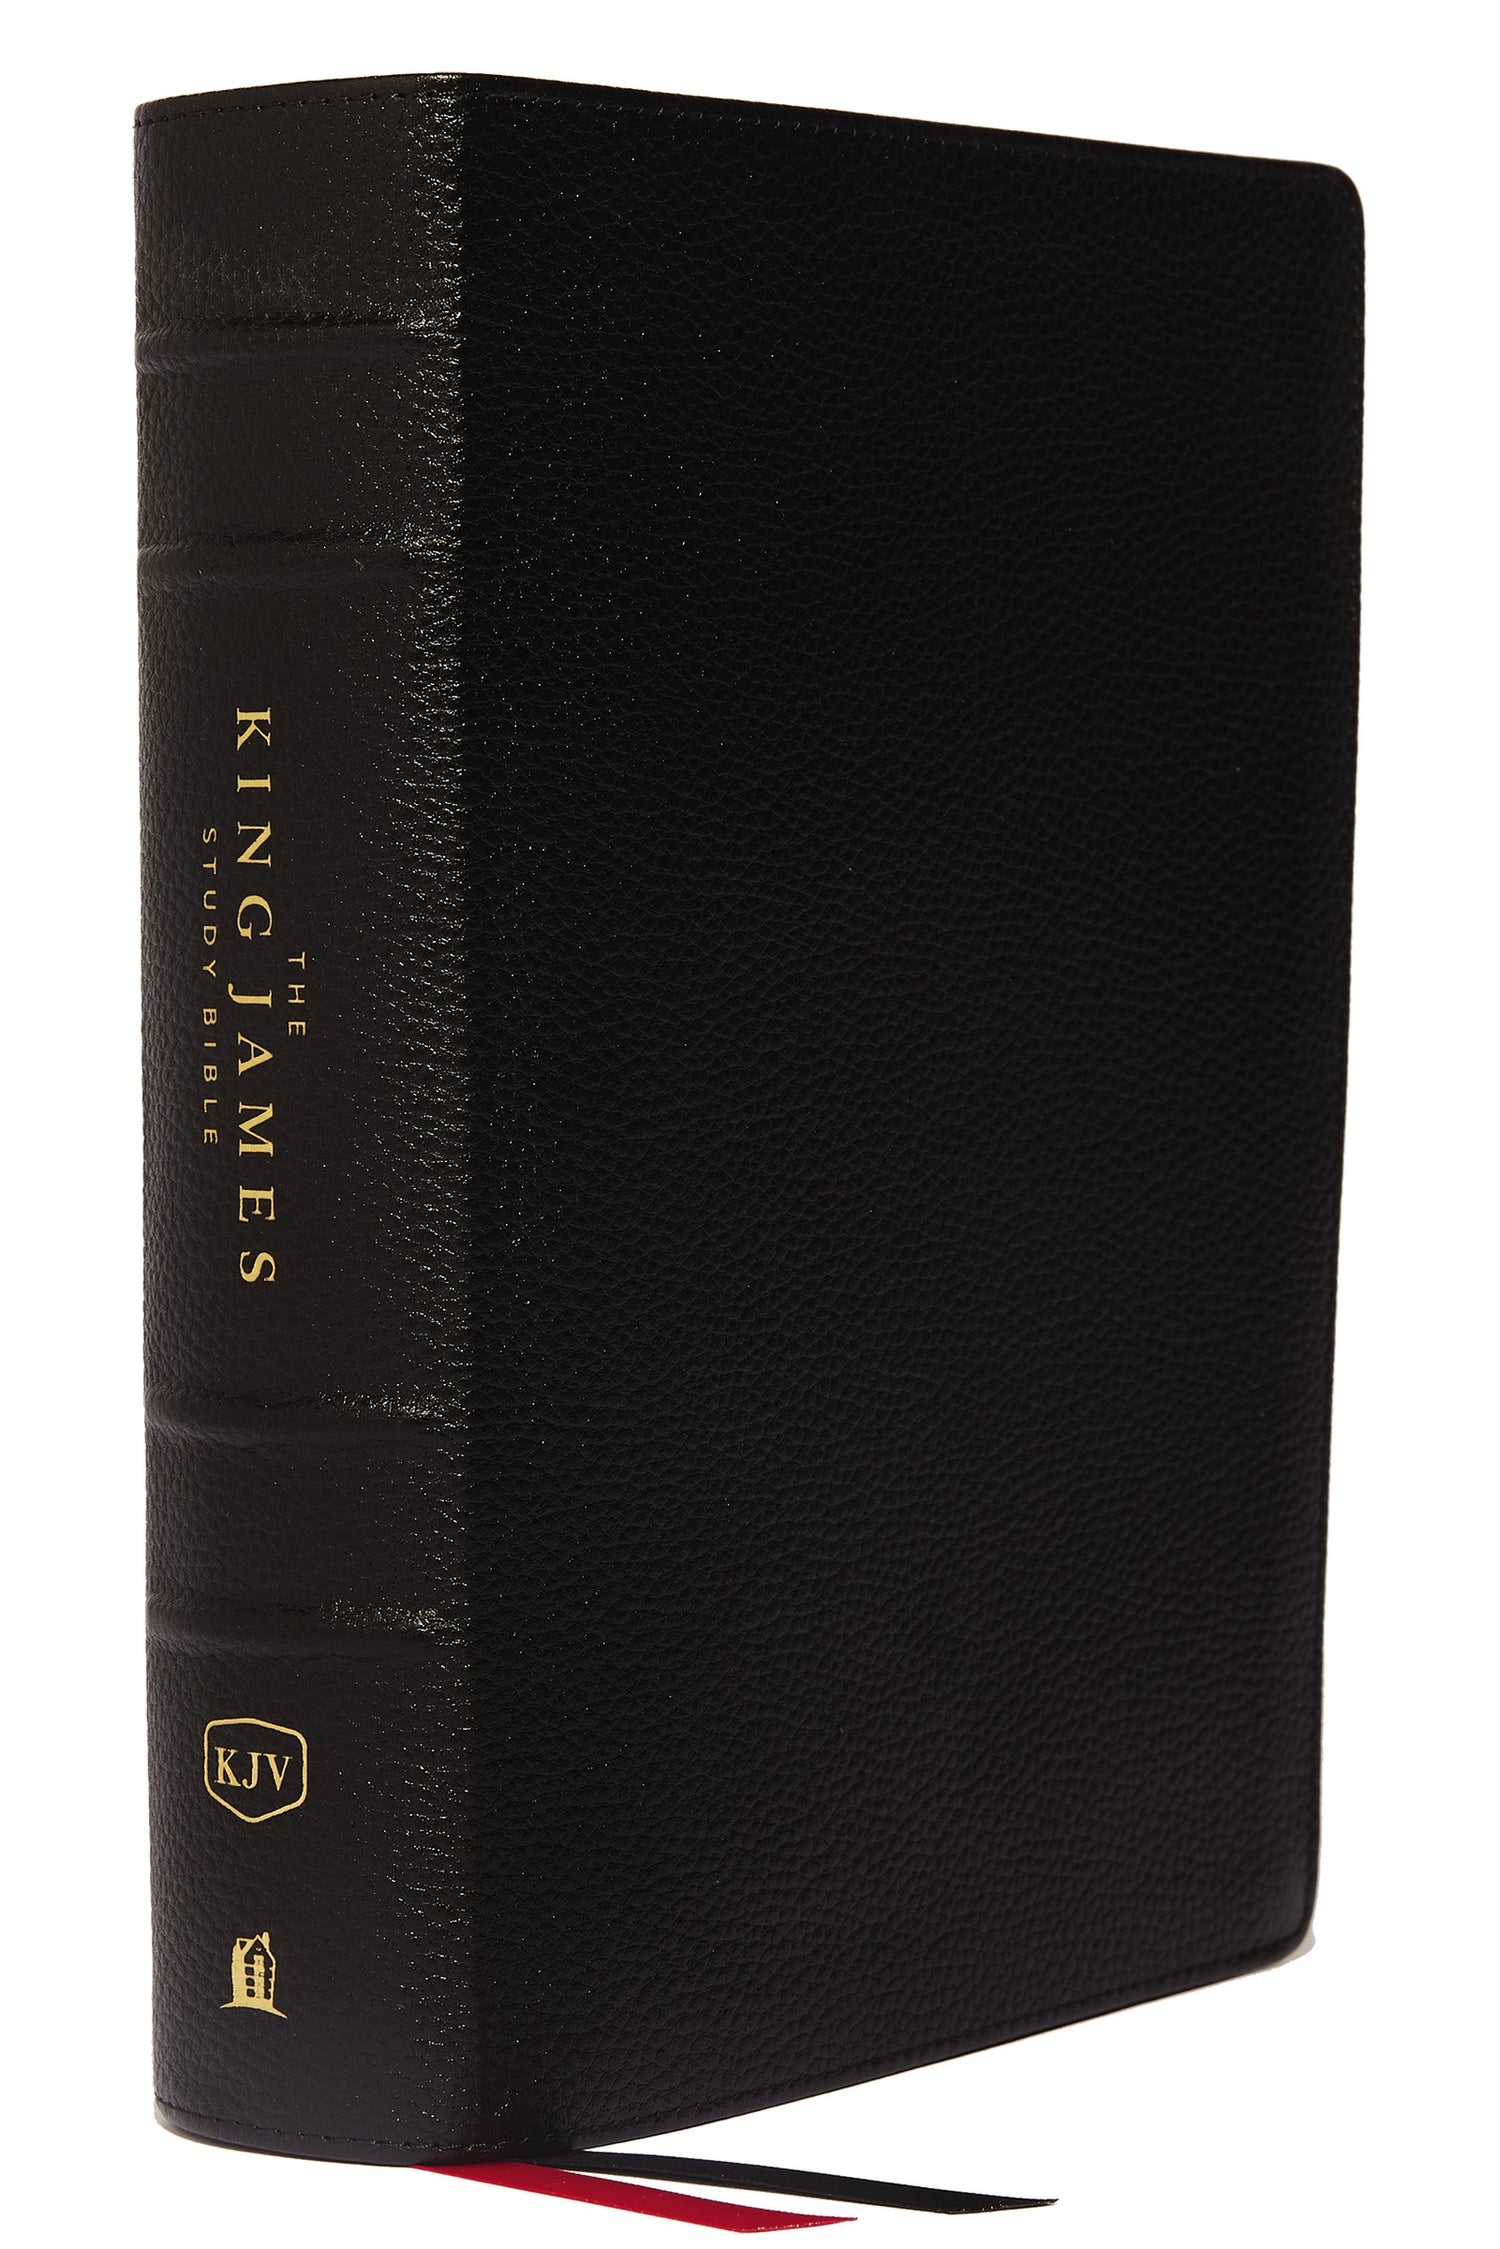 Seed of Abraham Christian Bookstore - (In)Courage - KJV Study Bible (Full-Color)-Black Genuine Leather Indexed